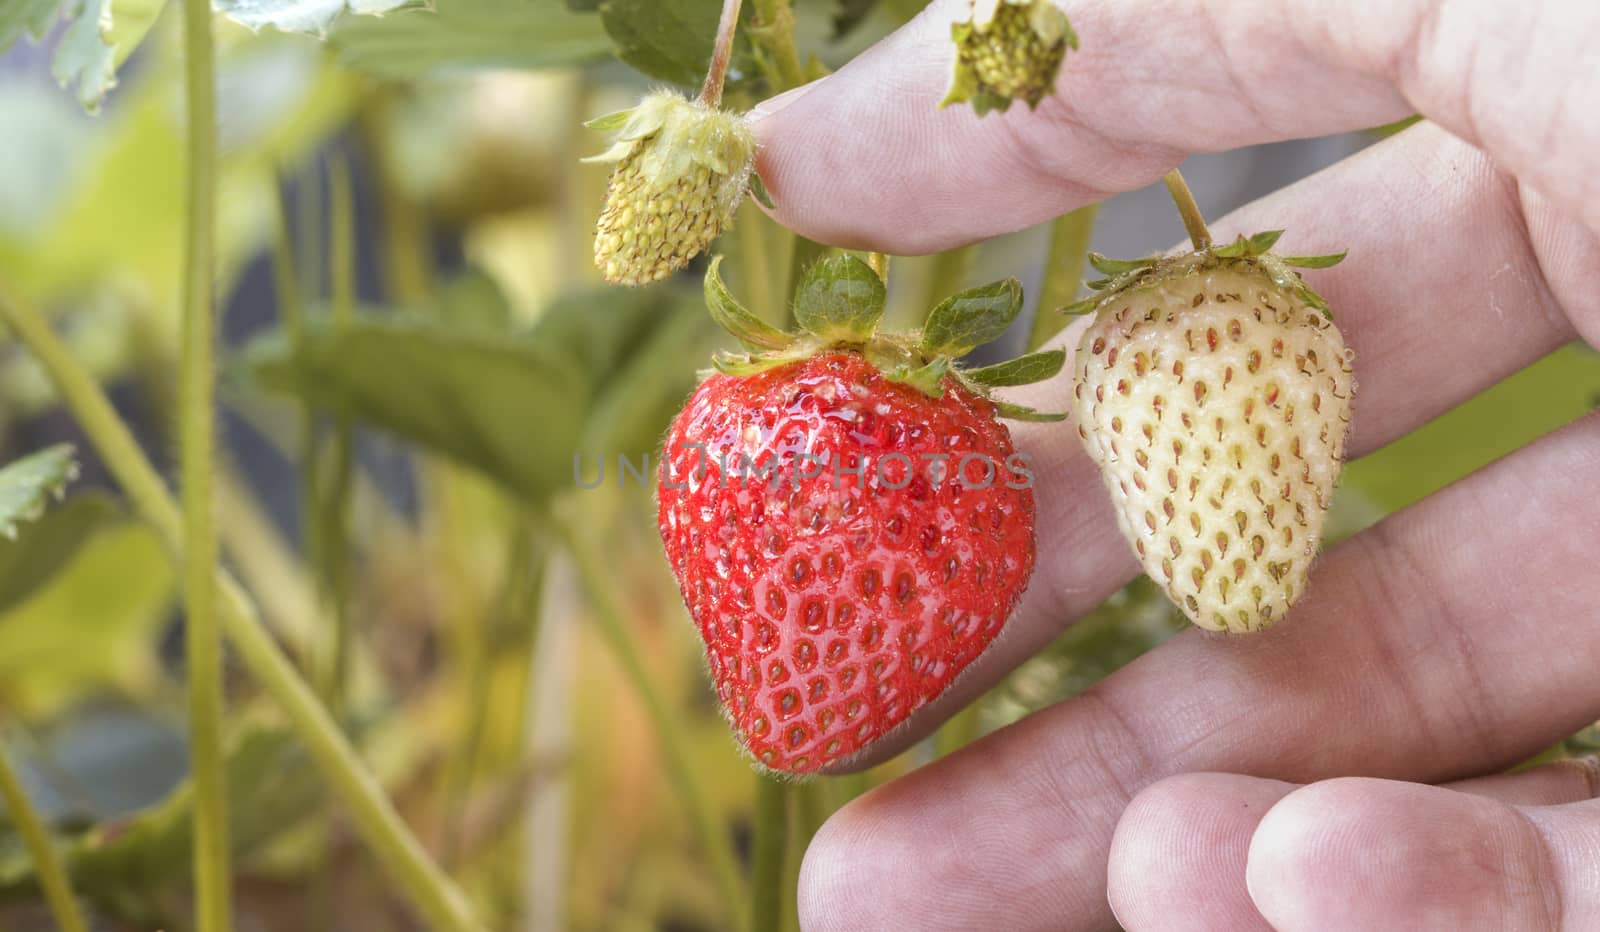 Close up of a hand holding a ripe strawberry hanging from a plant with other strawberries around